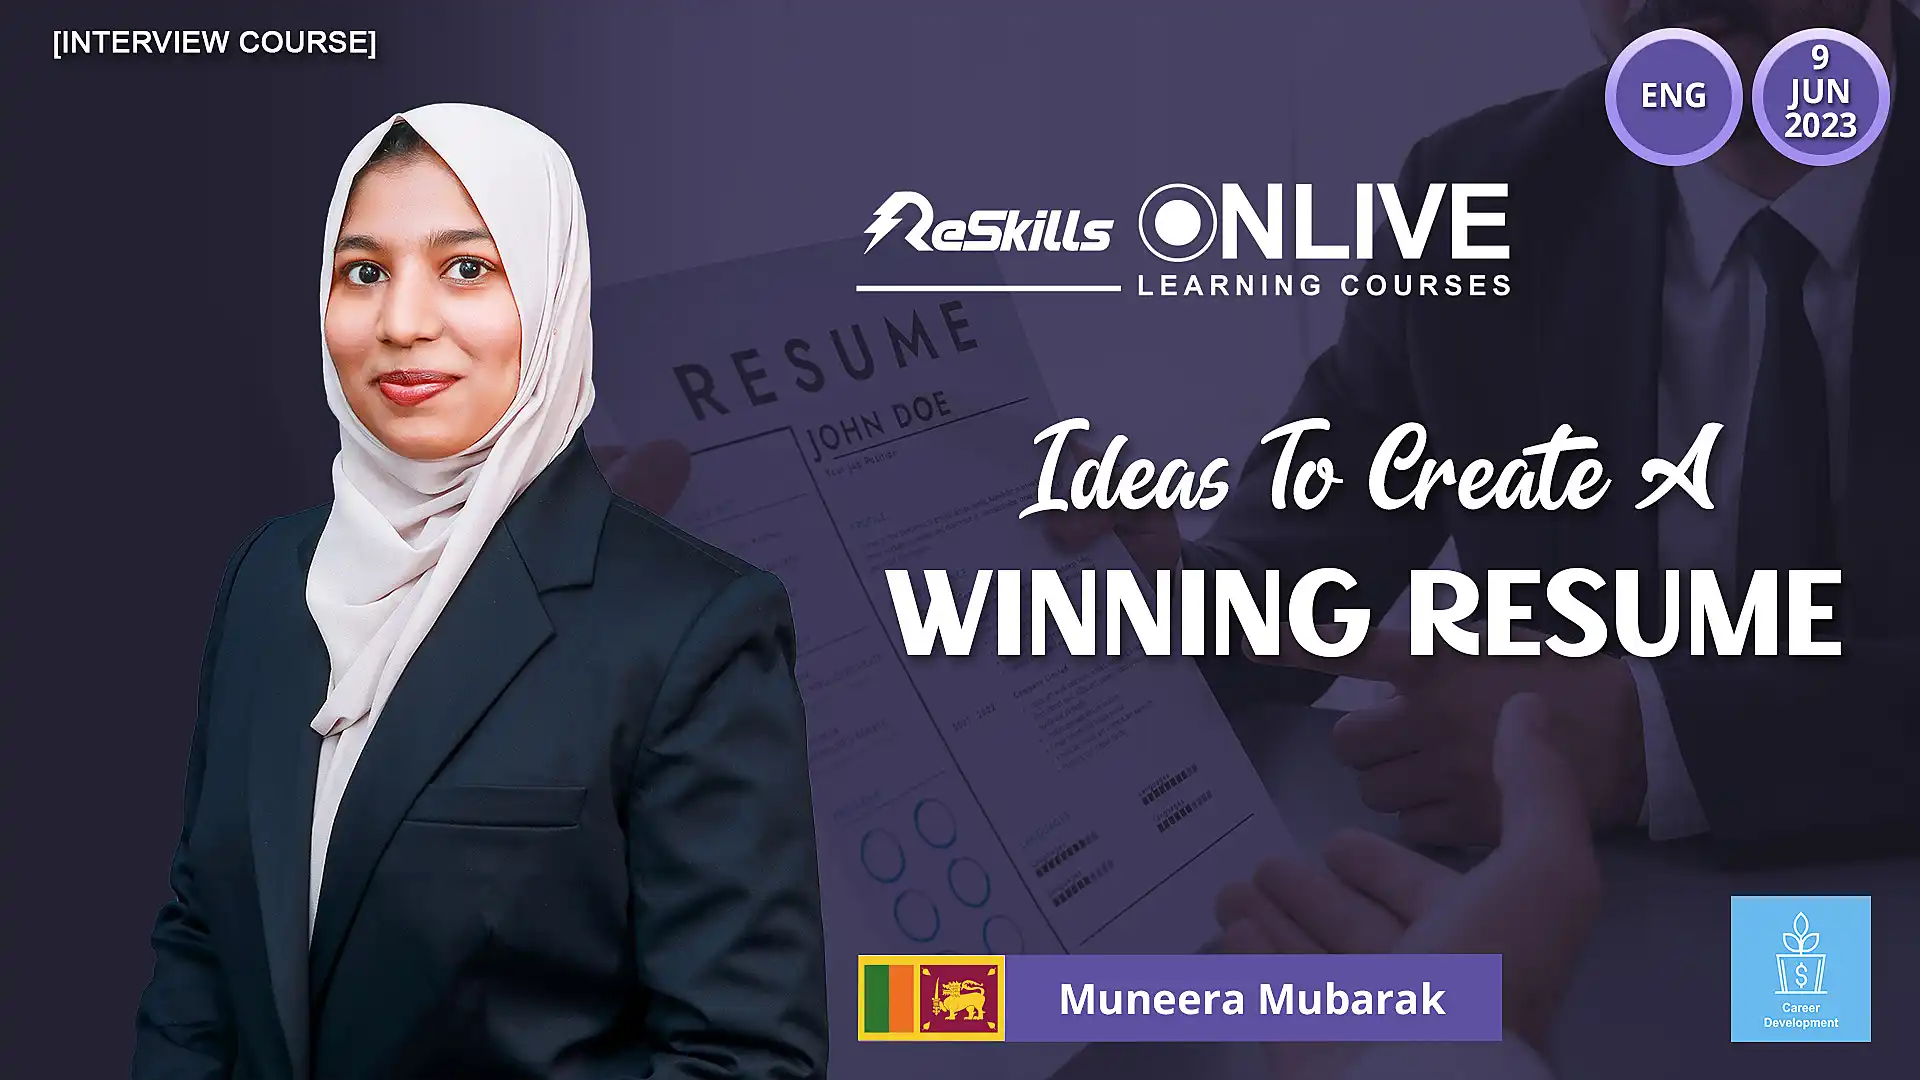 [Interview Course] Ideas To Create A Winning Resume - ReSkills